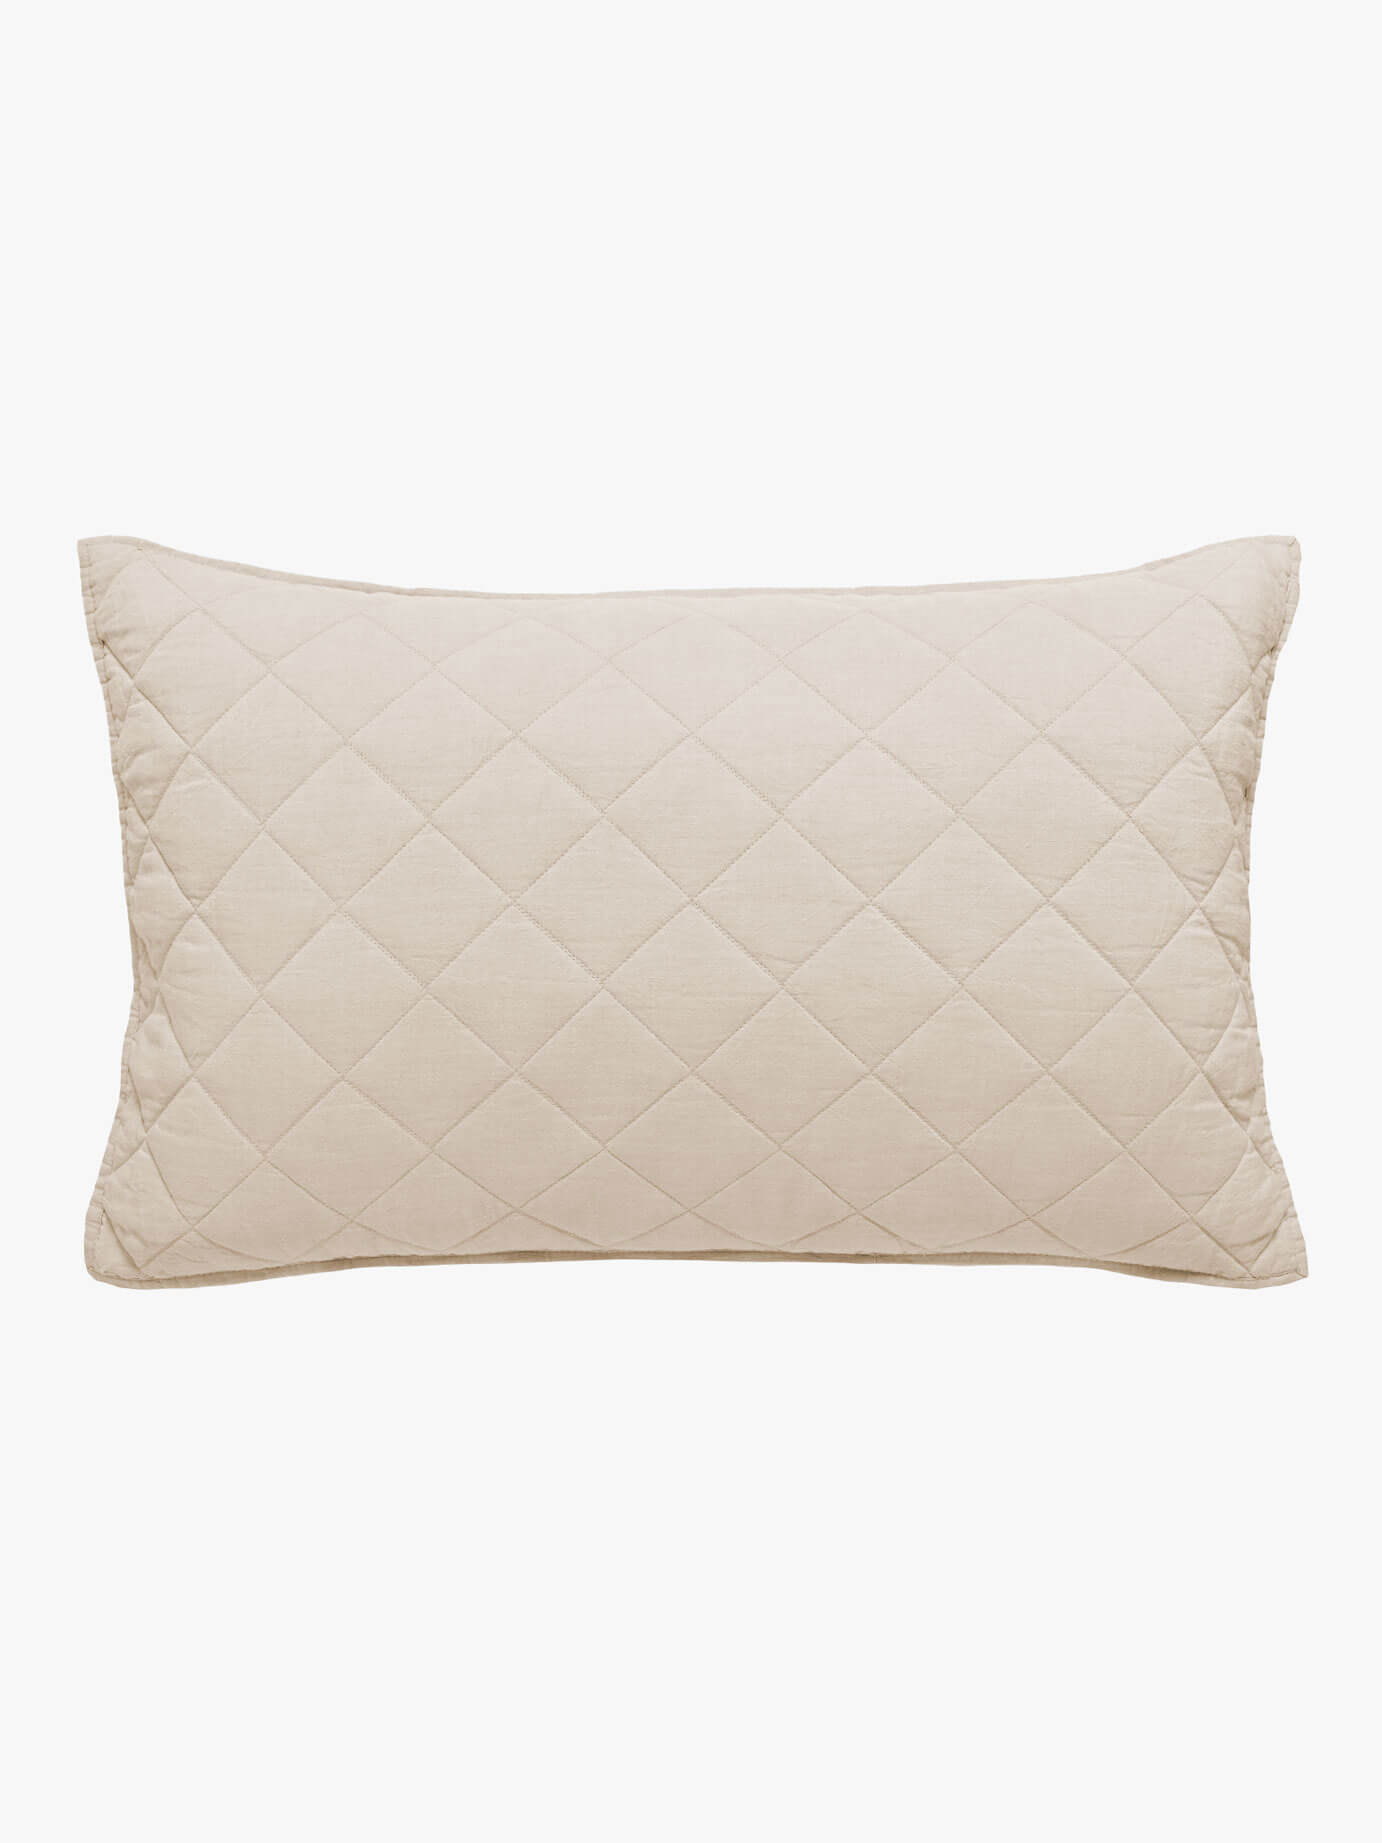 Soho Oatmeal Linen & Cotton Quilted Pillowcases